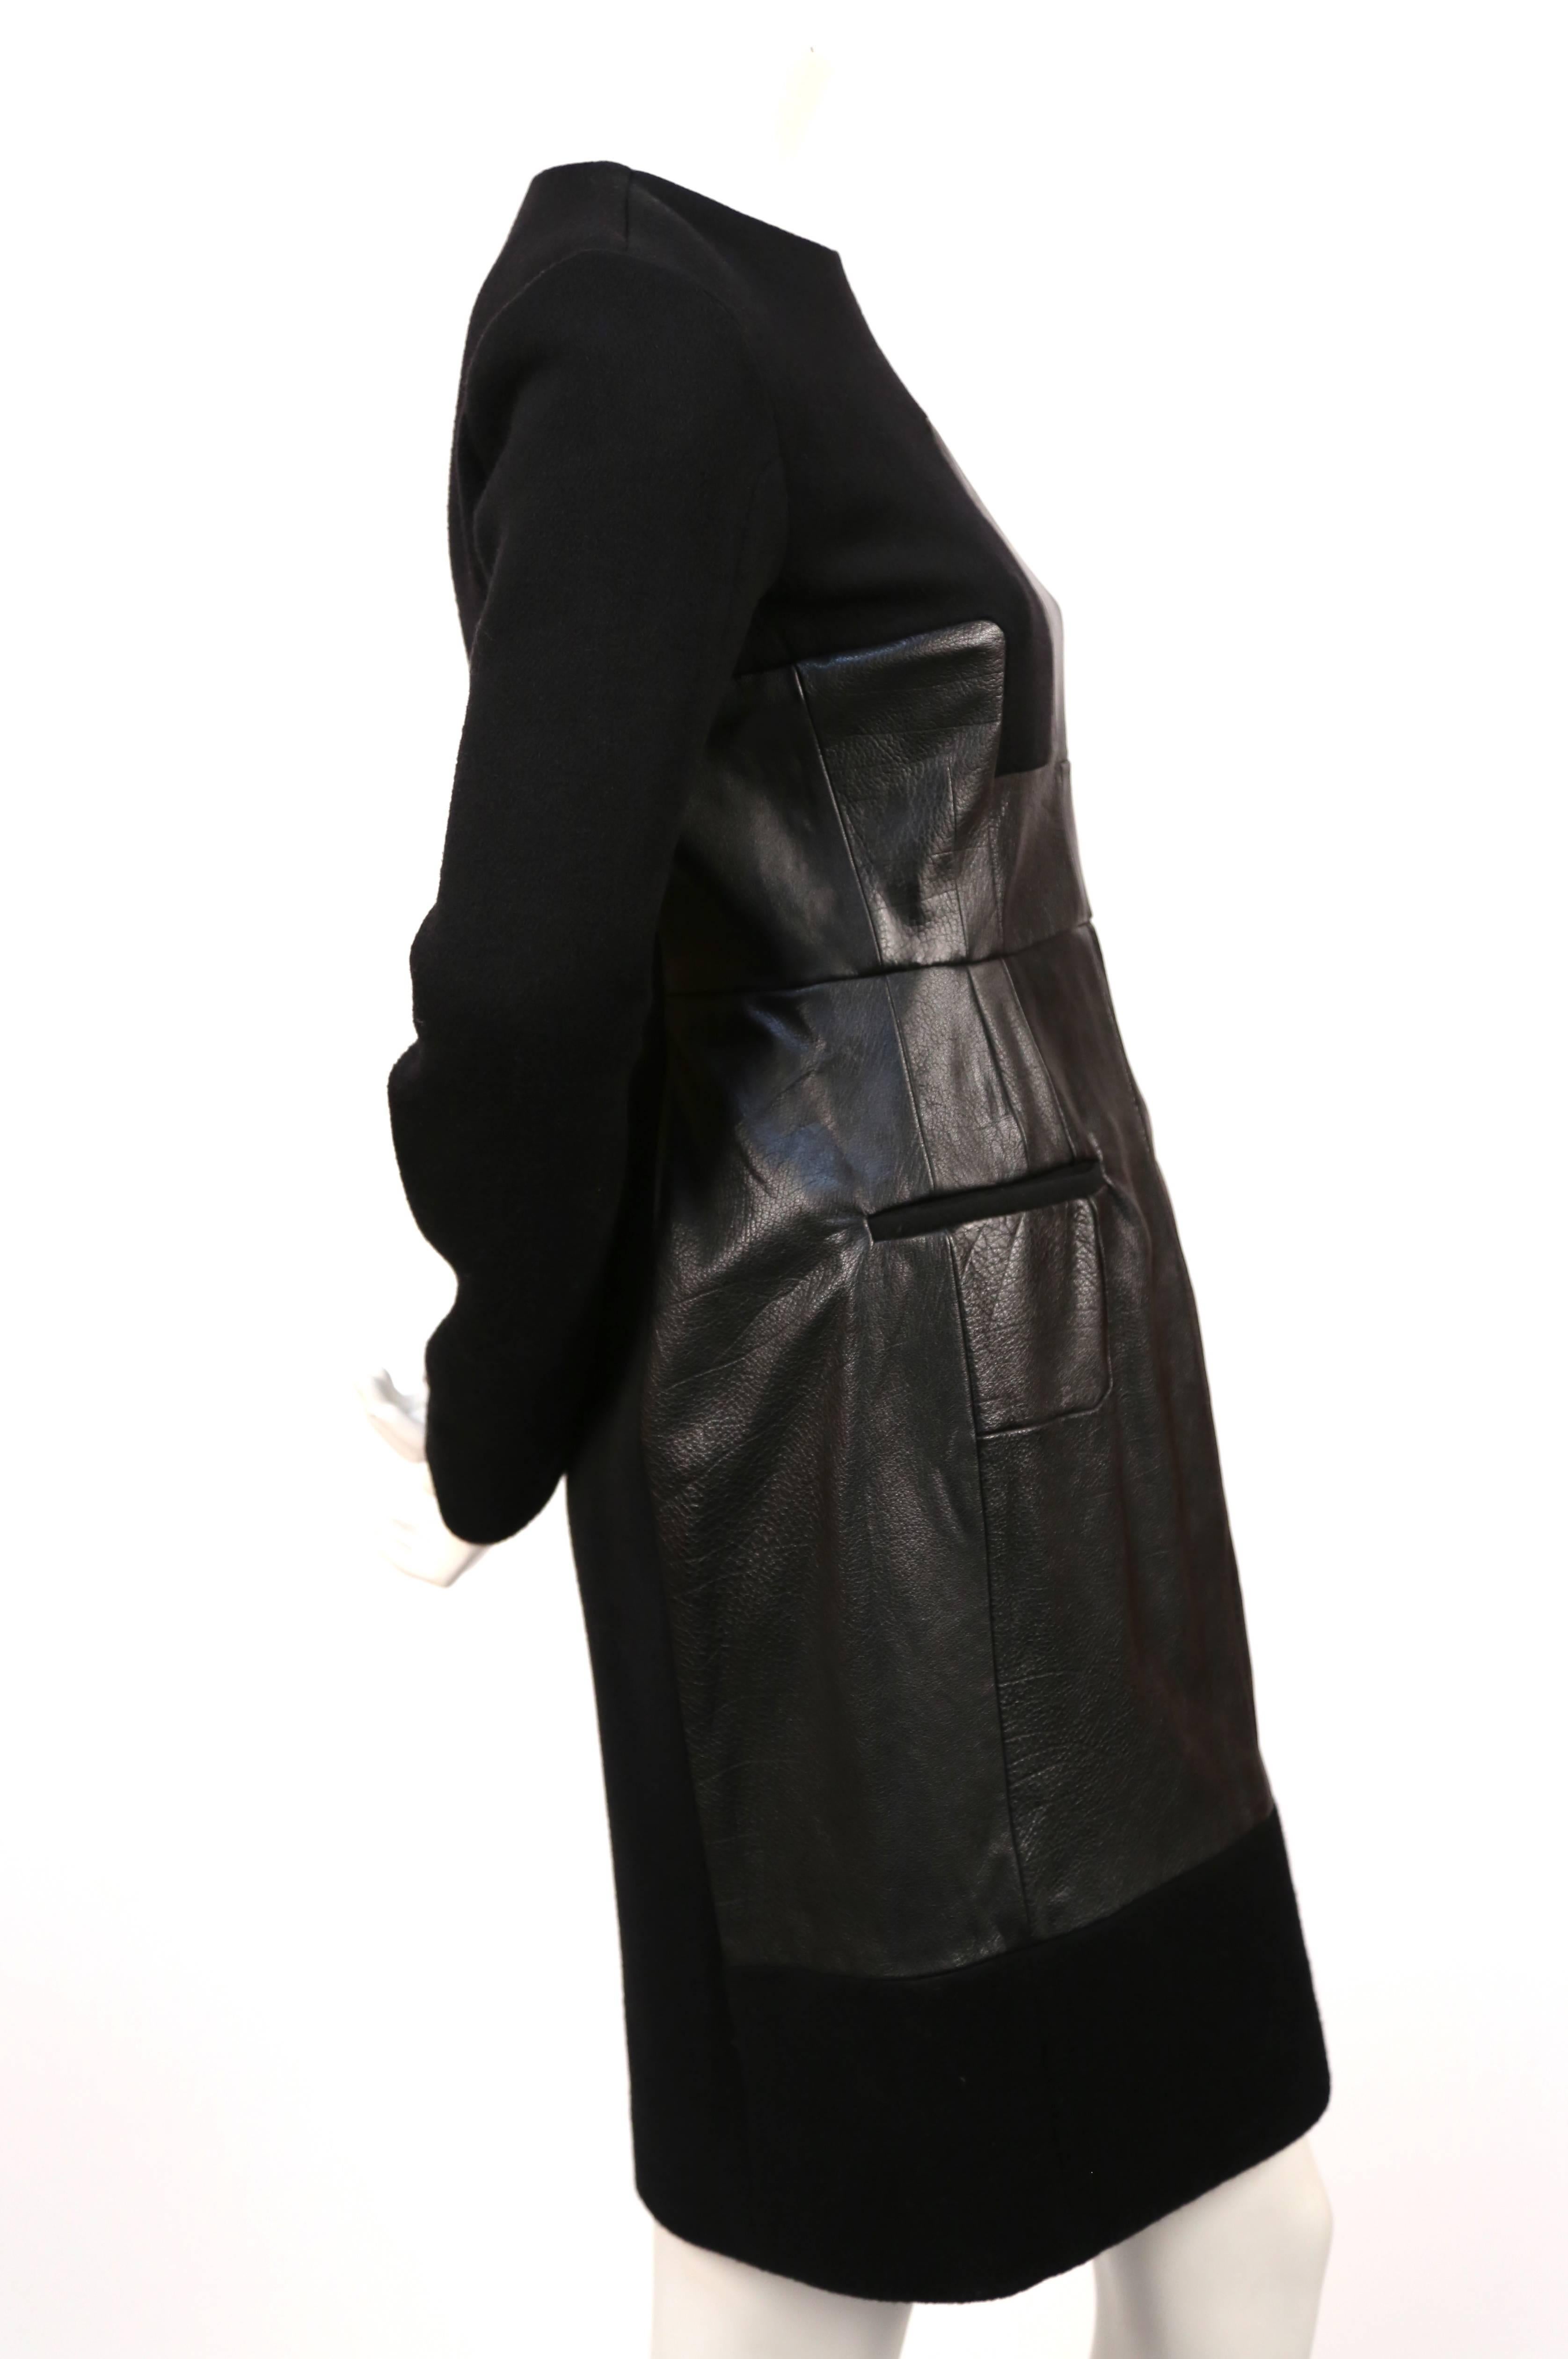 Black wool and patchwork leather dress designed by Phoebe Philo for Celine as seen on the fall 2011 runway. Very rare piece. Dress is a French size 38. Approximate measurements:  shoulder 15.5", bust 34", waist 32", hips 40" ,